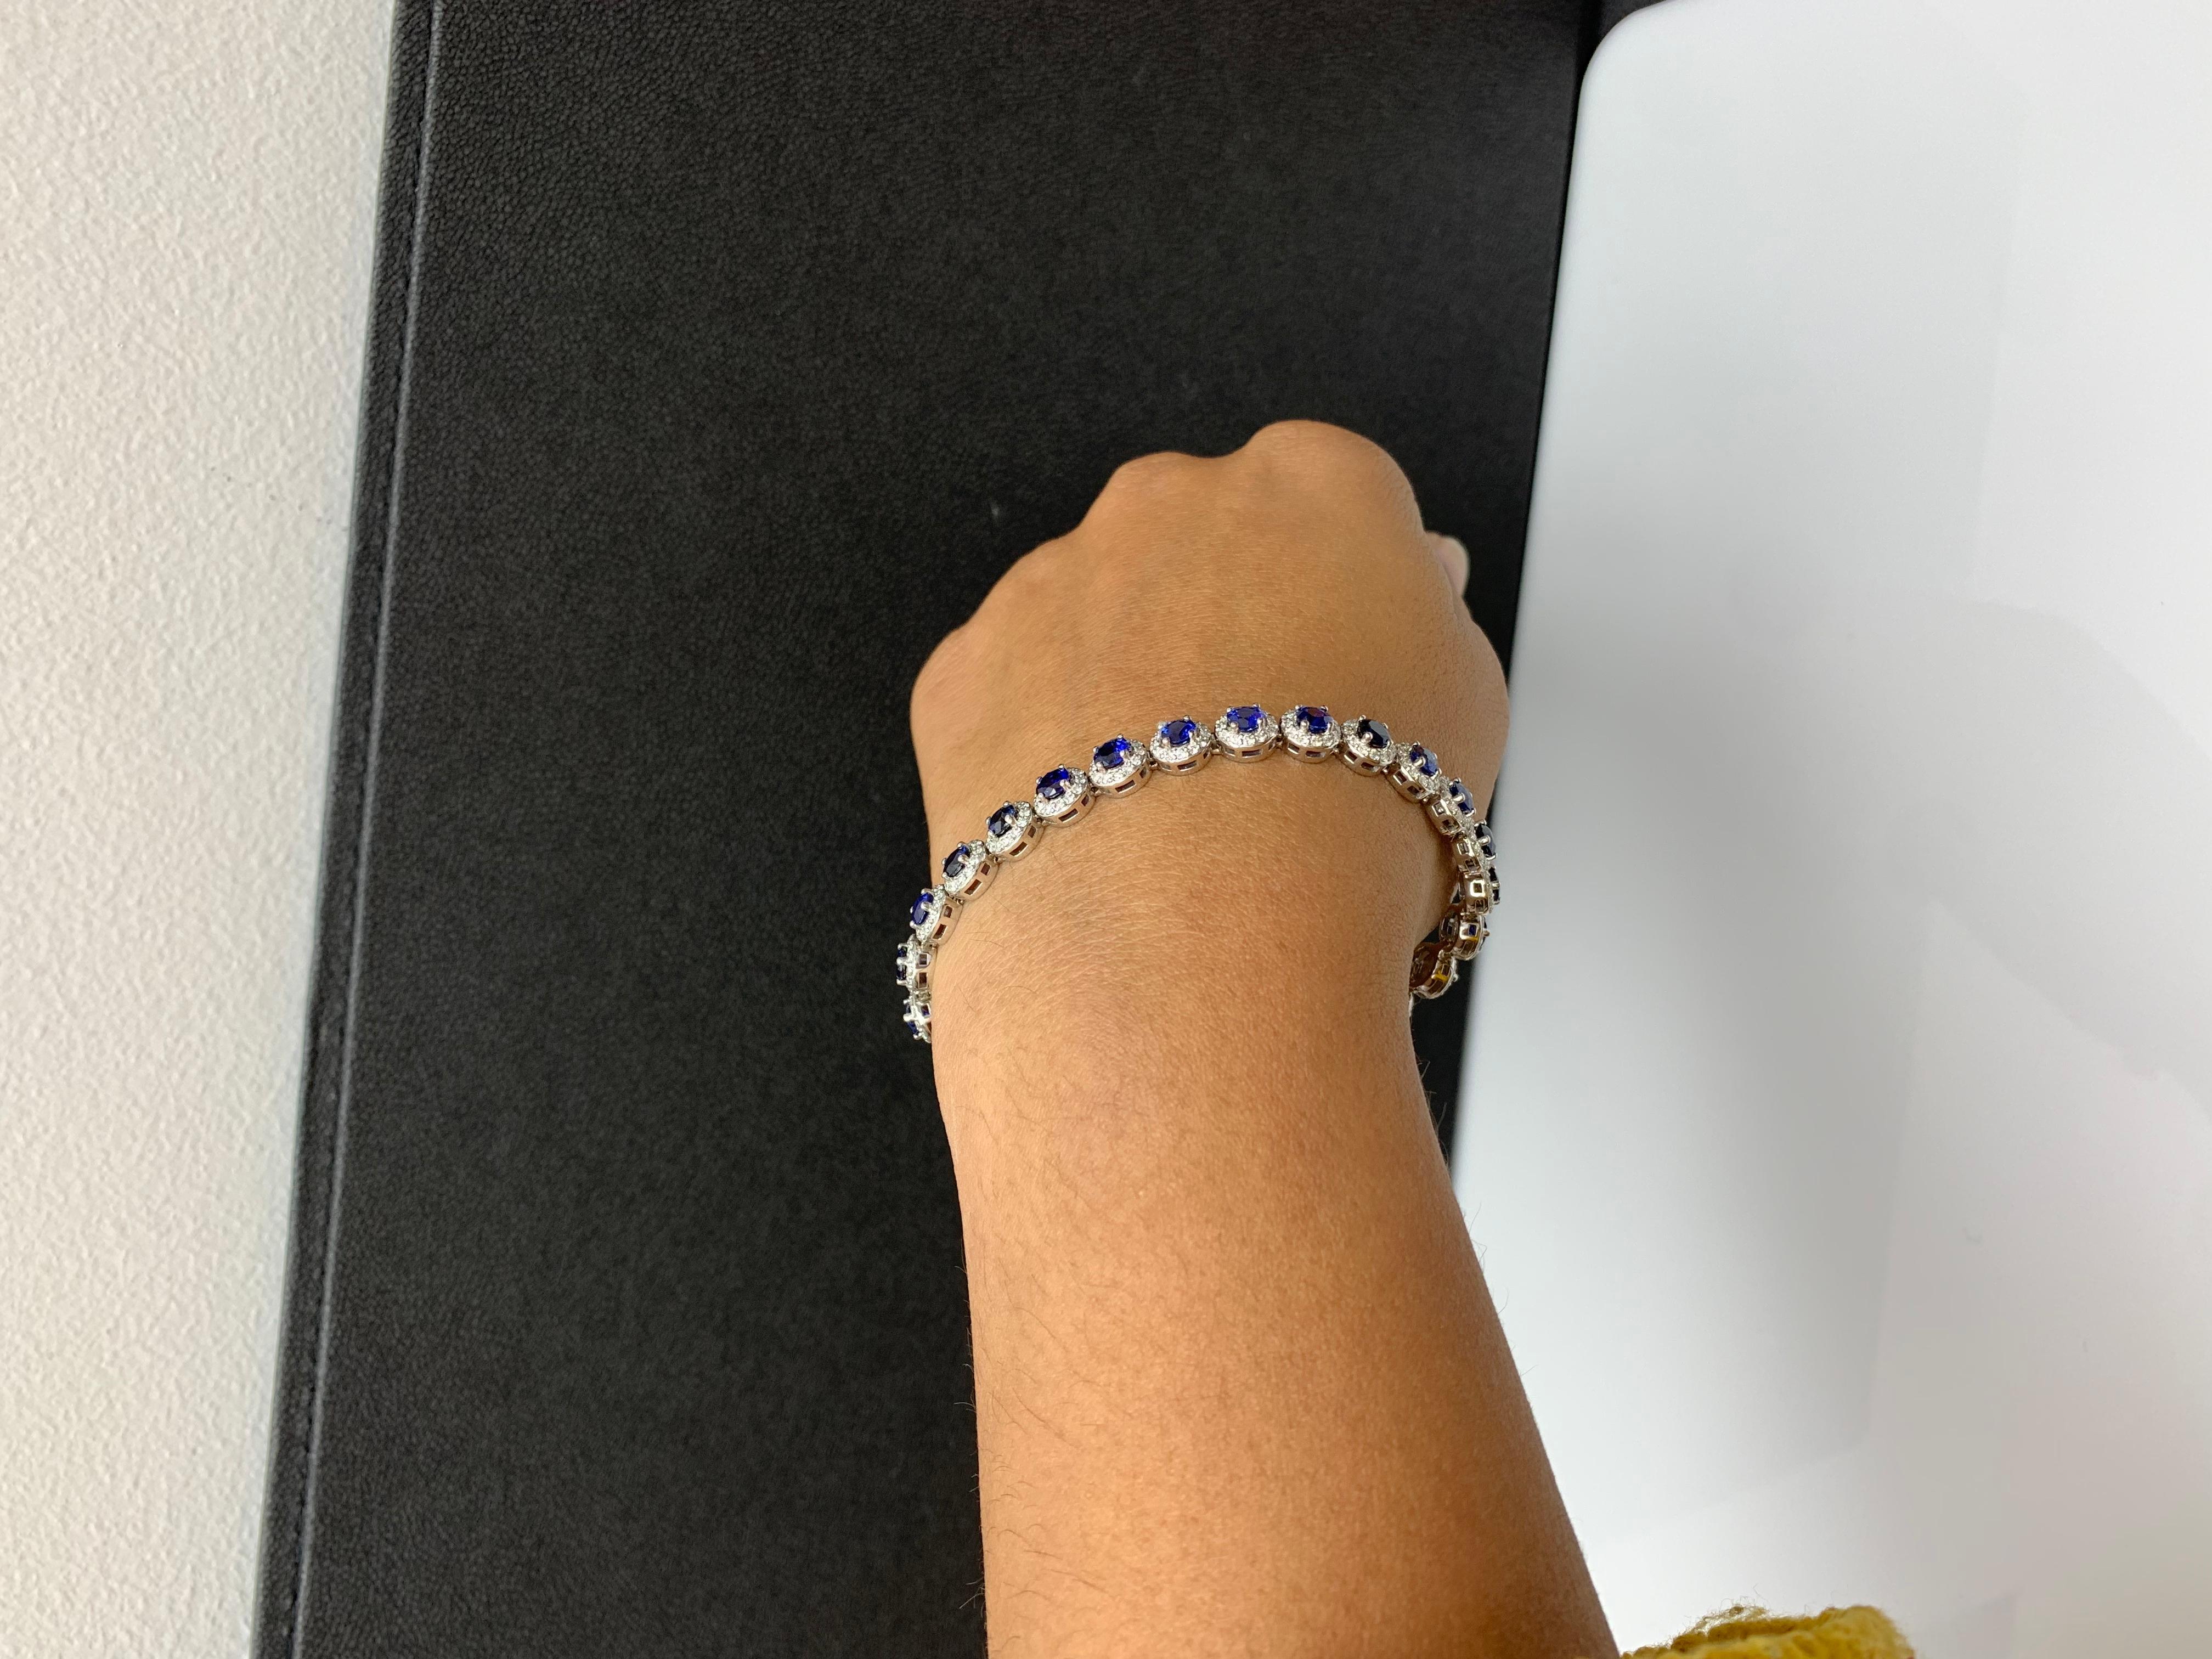 7.47 Carat Blue Sapphire and Diamond Halo Tennis Bracelet in 14k White Gold For Sale 2